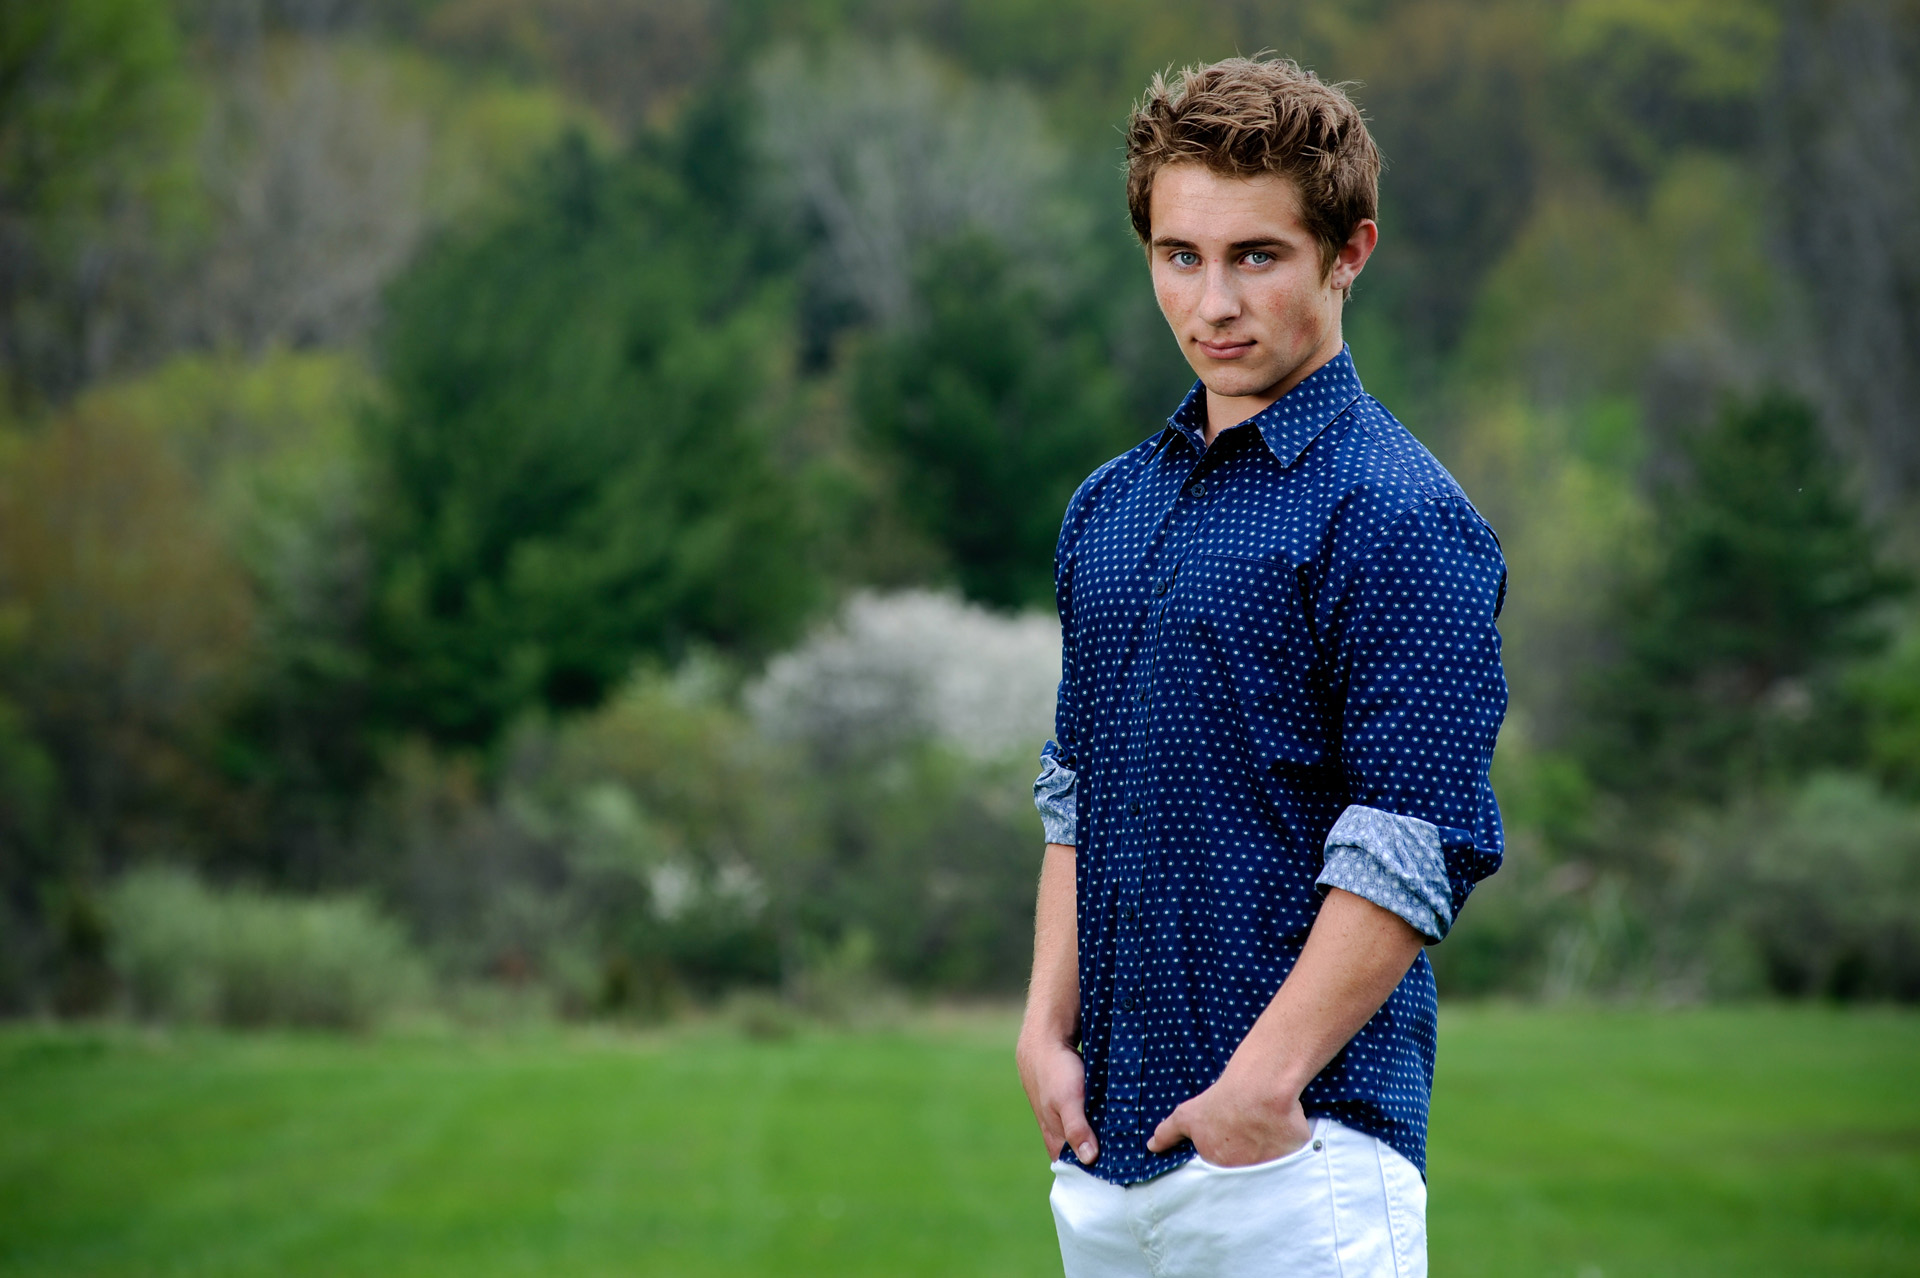 Troy , Michigan senior photographer shows a high school senior standing out in nature during his senior shoot.